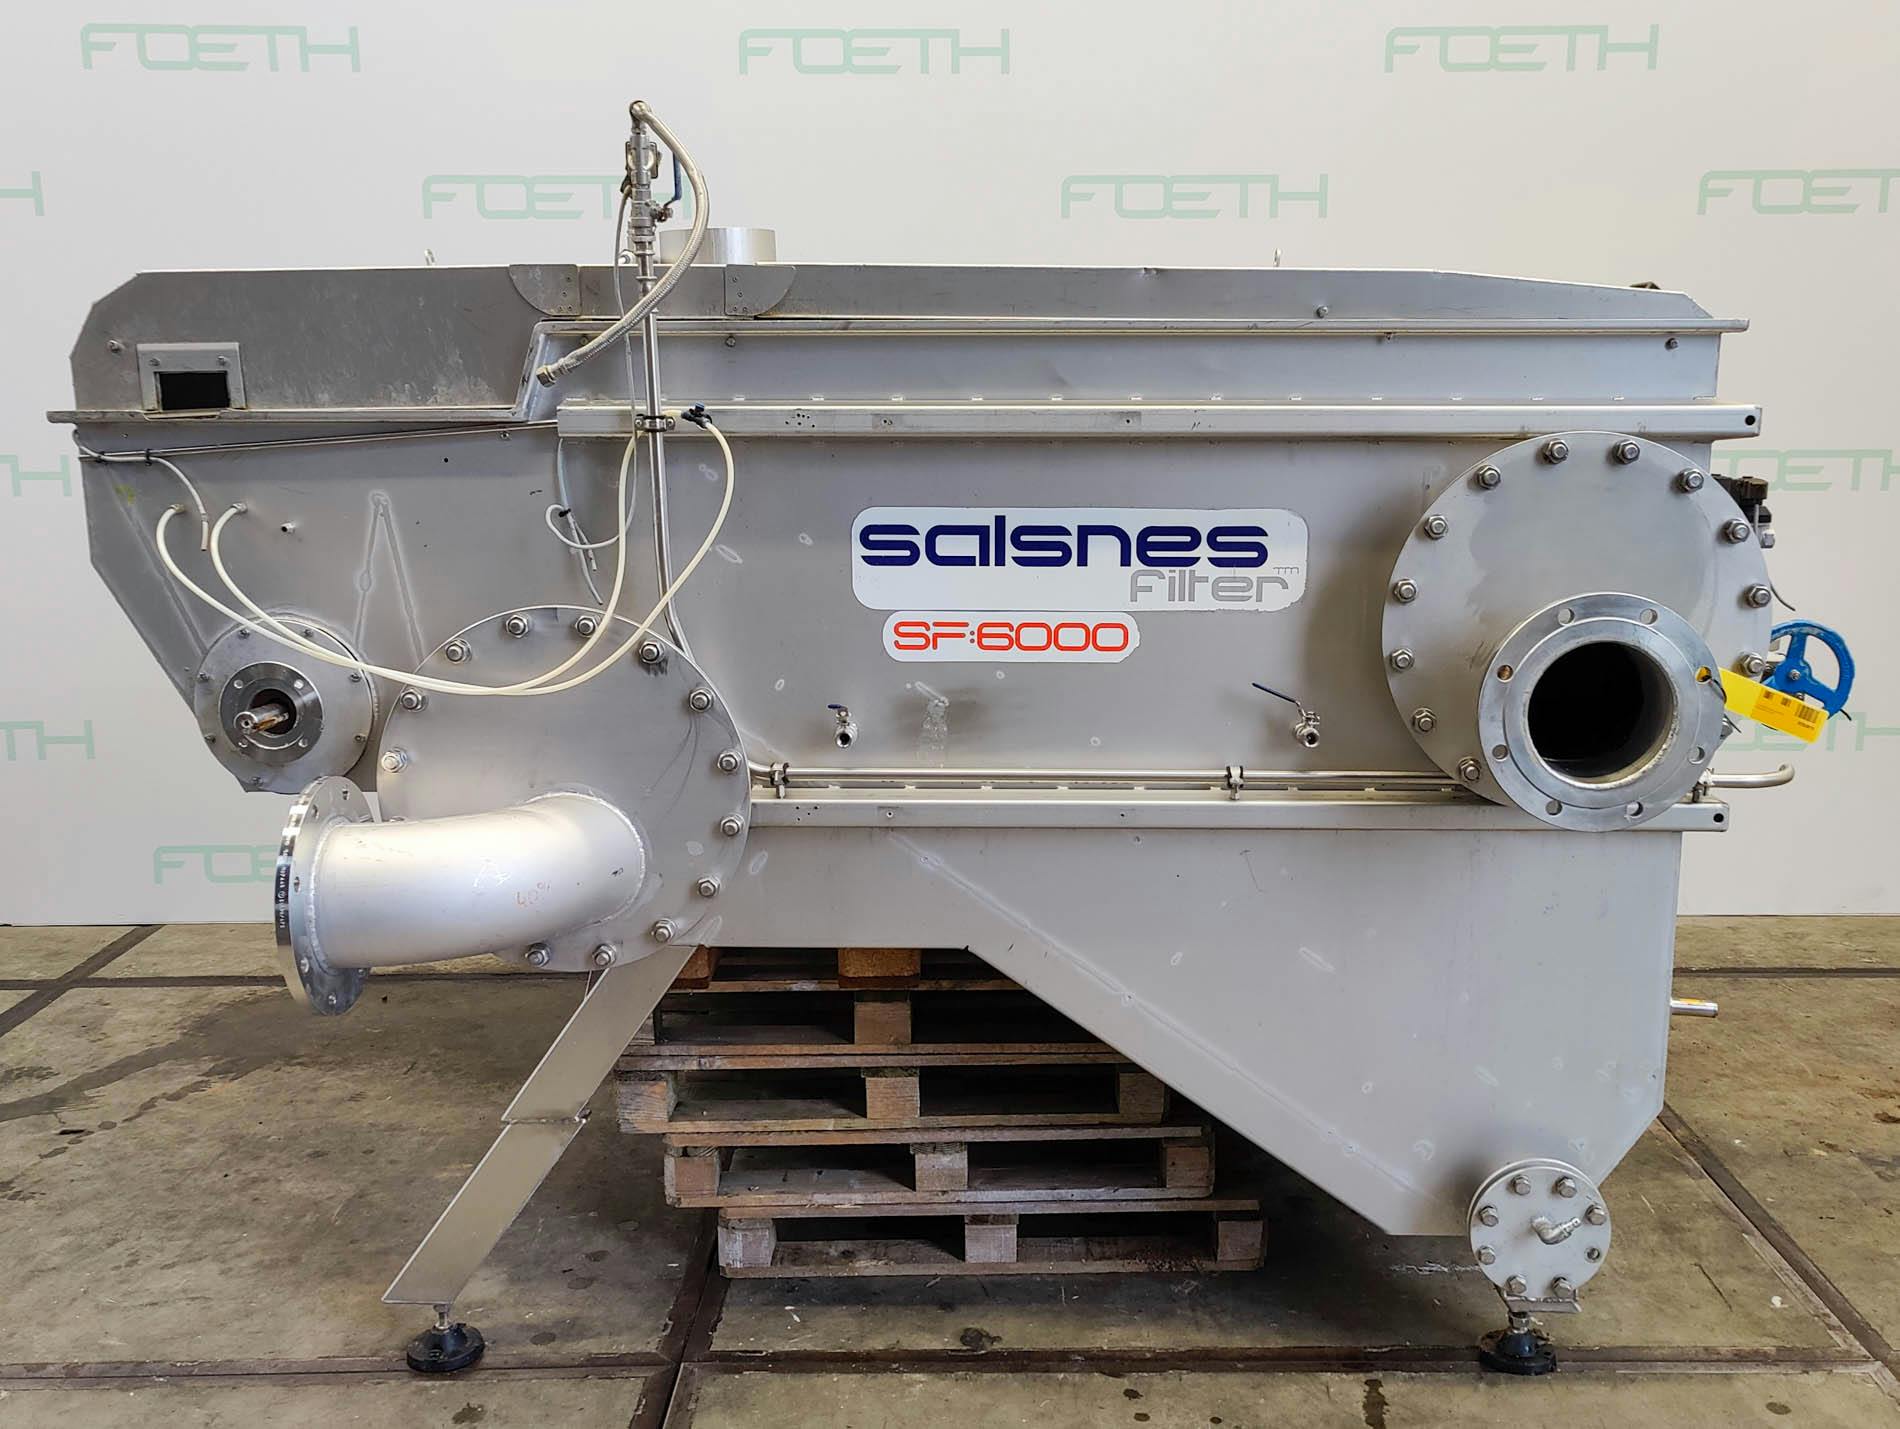 Salsnes 6000 "Solids Separation with Integrated Sludge Thickening and Dewatering" - Filtro